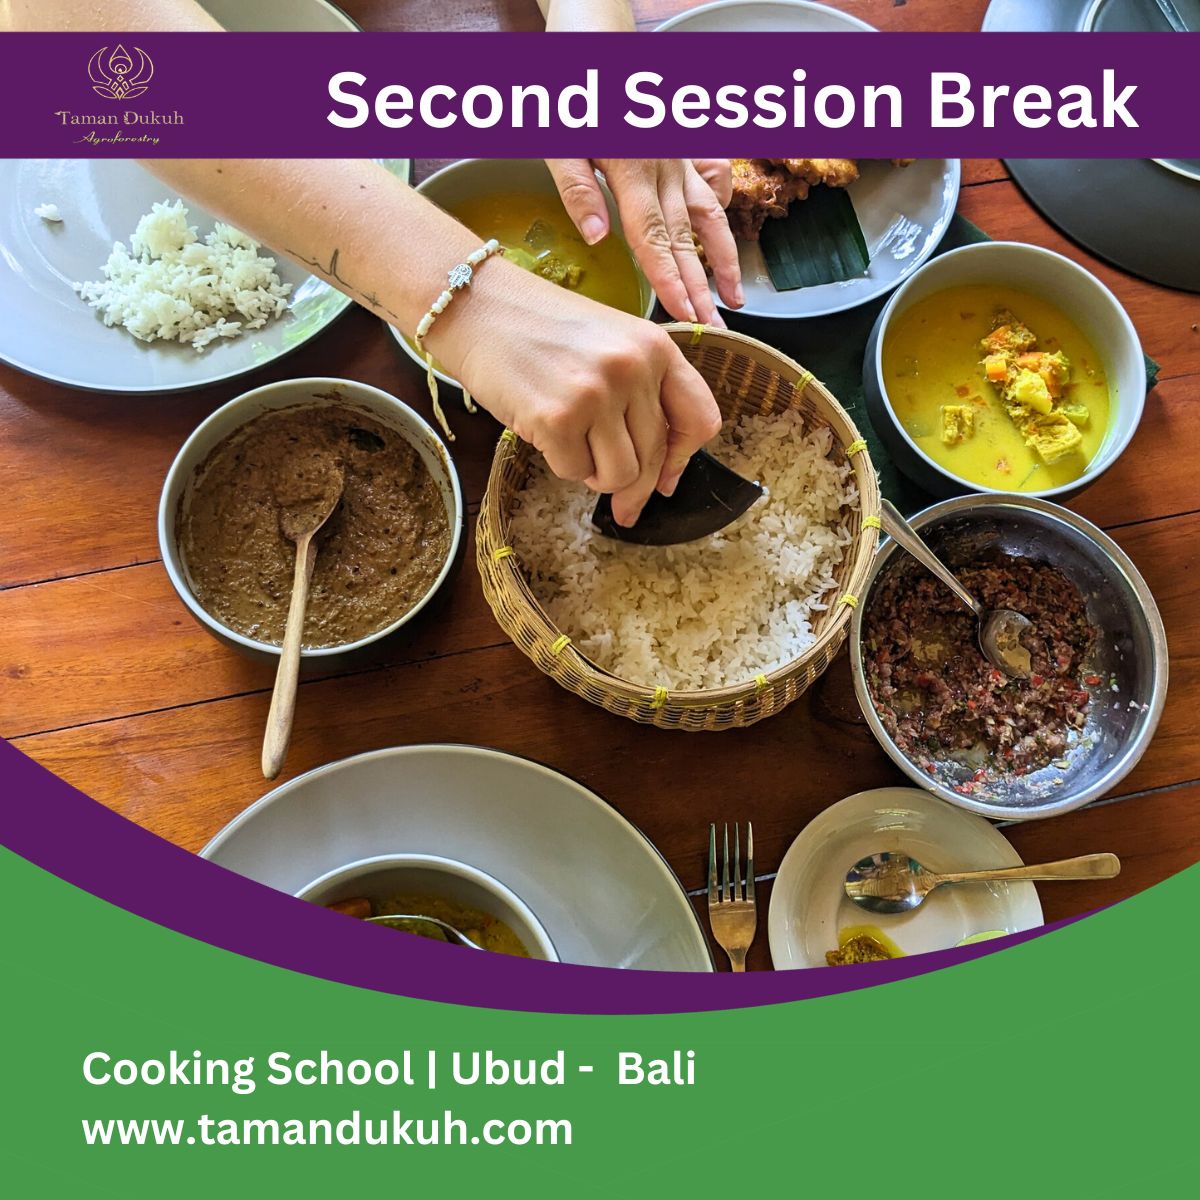 second session break in taman dukuh cooking class